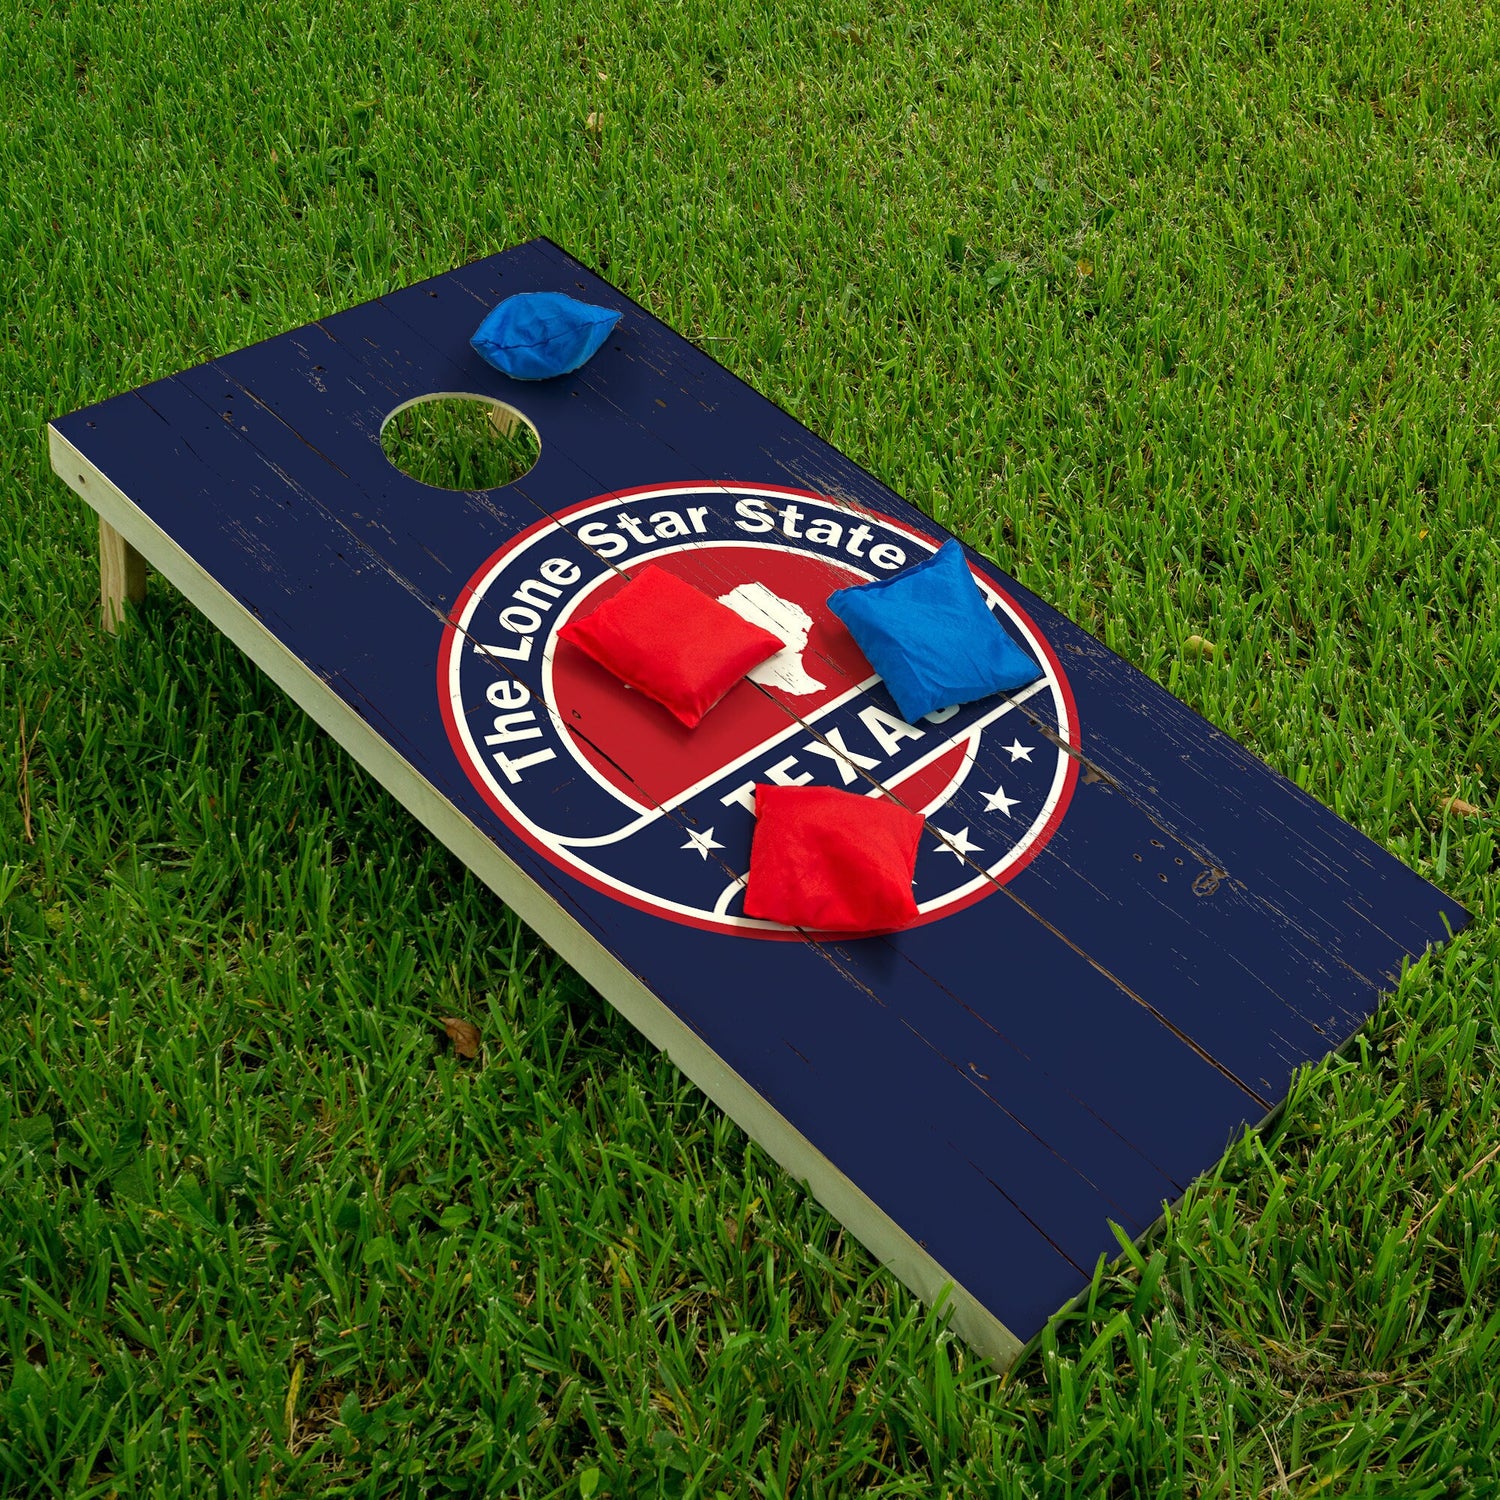 Cornhole Board Wraps and Decals for Boards Set of 2 Skins Professional Vinyl Covers Sticker - Texas in Dark Blue Football Tailgating Decal